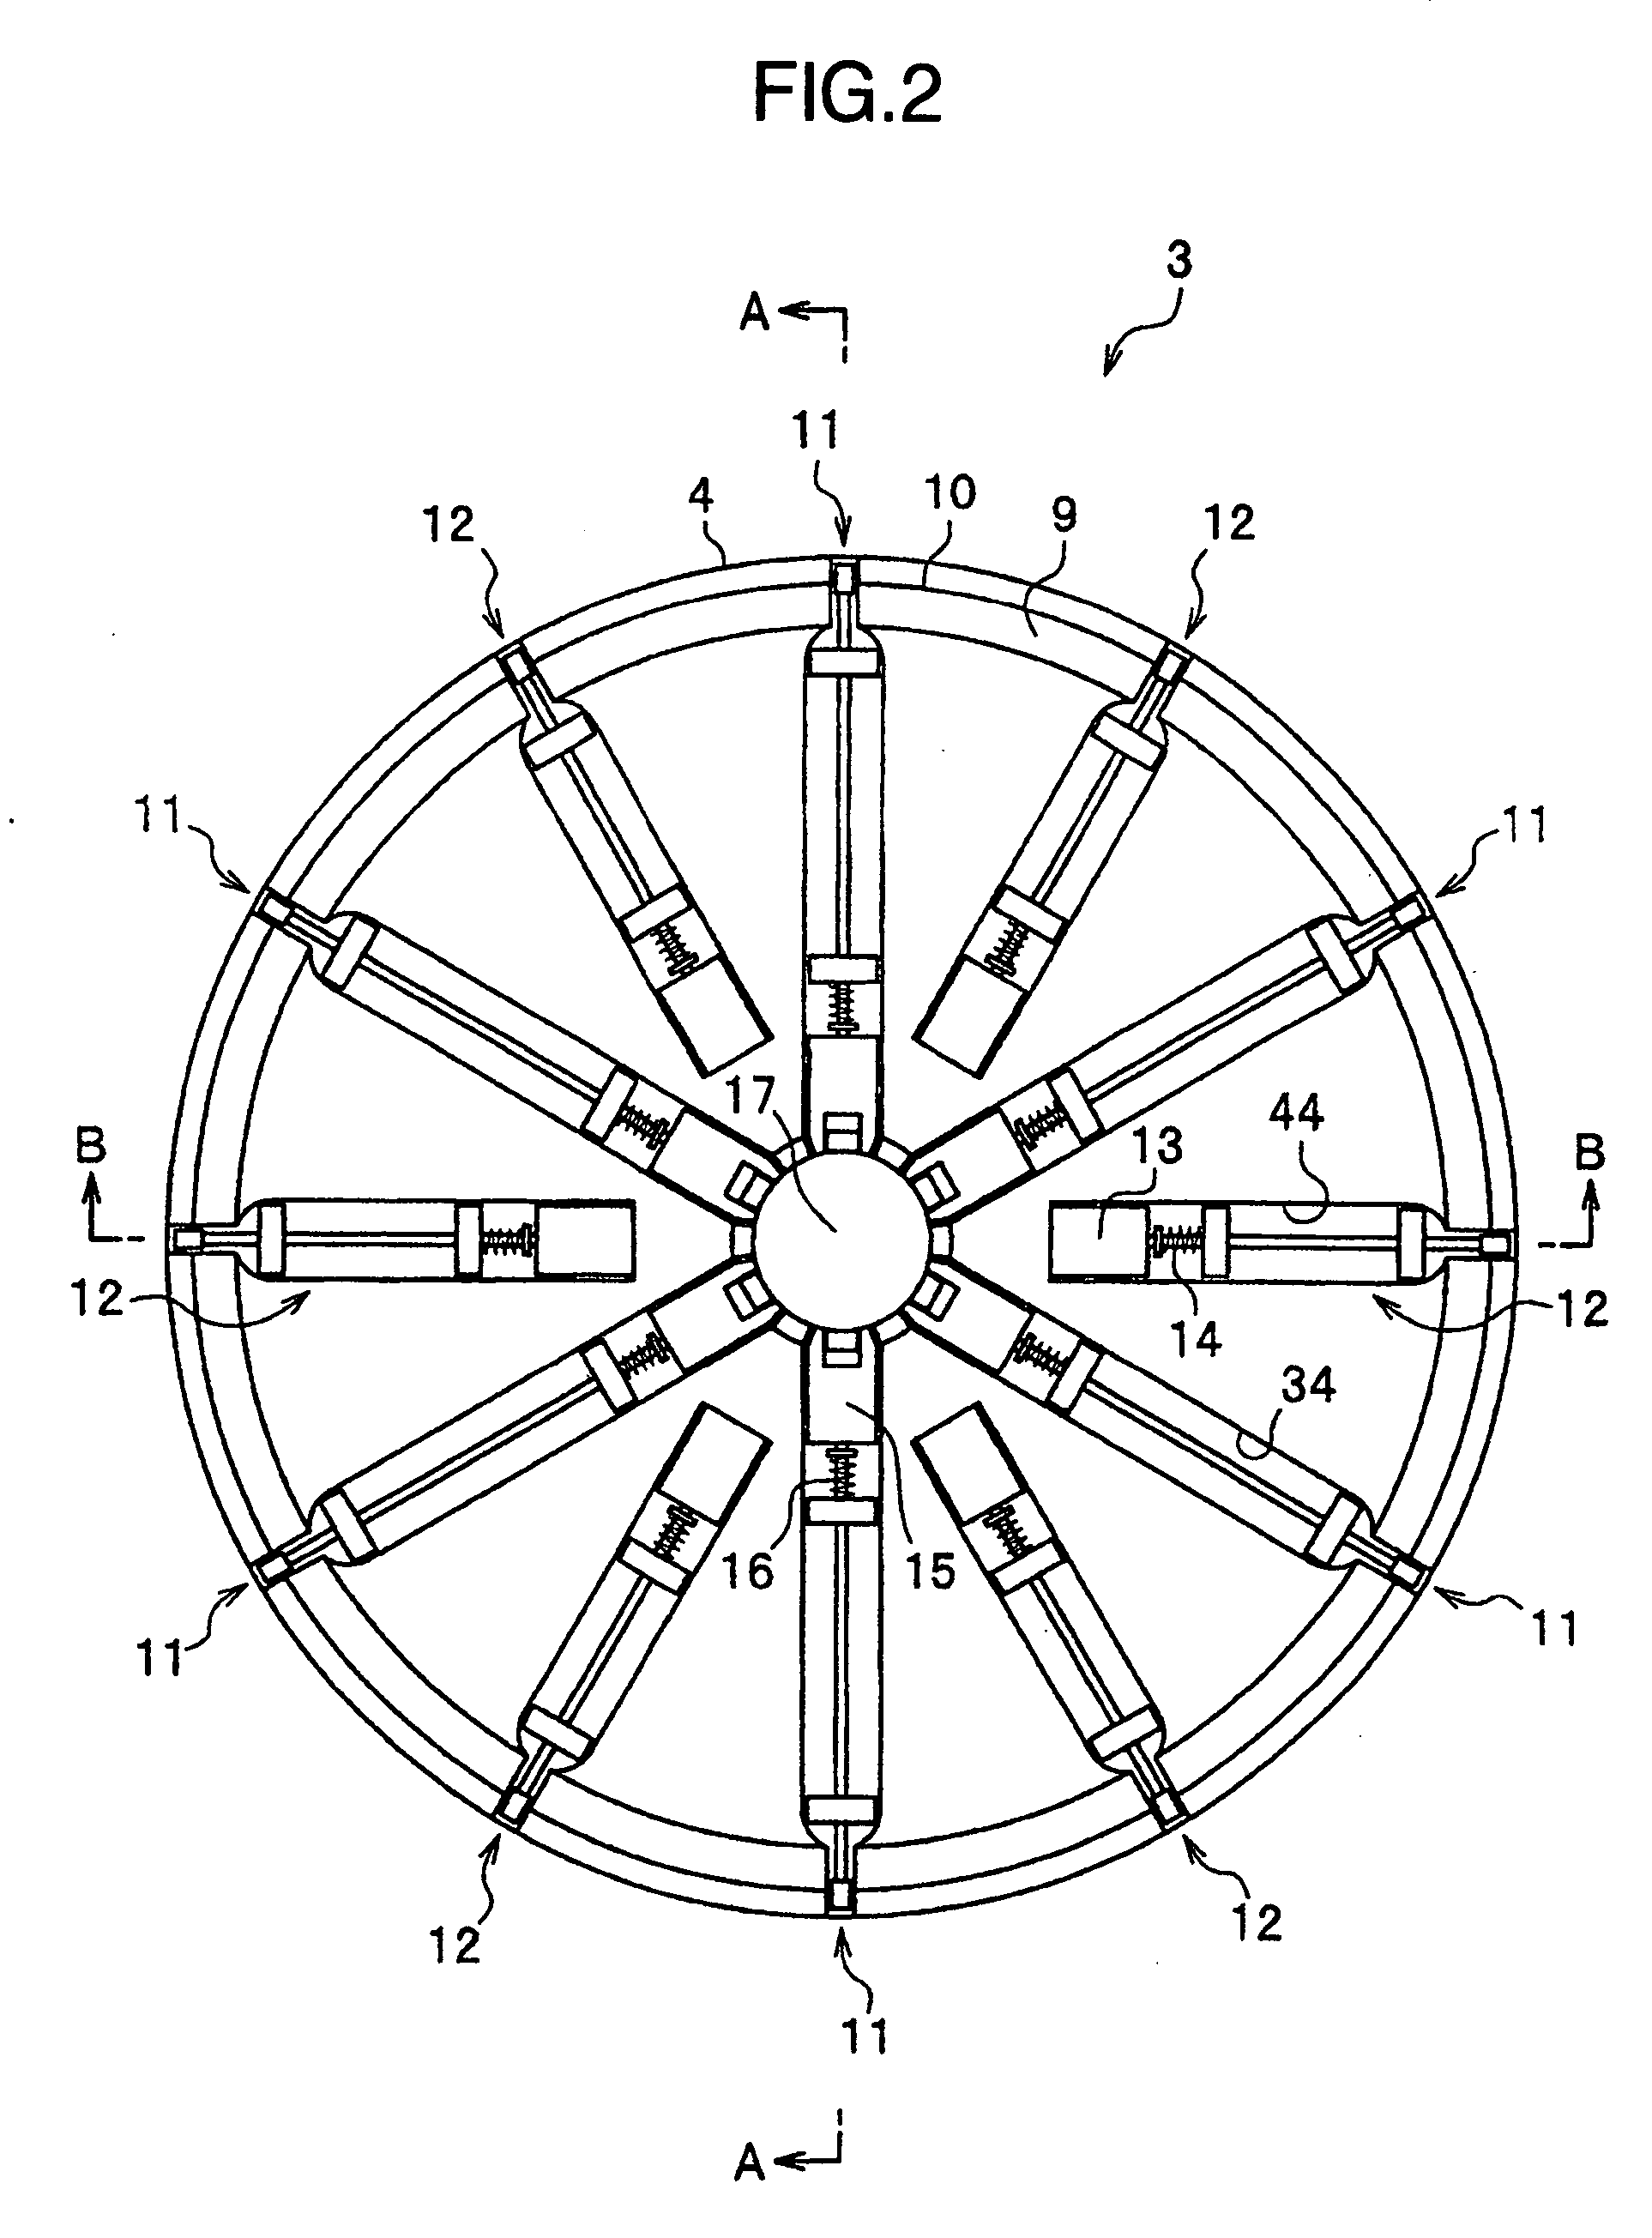 Substrate holding apparatus, and inspection or processing apparatus